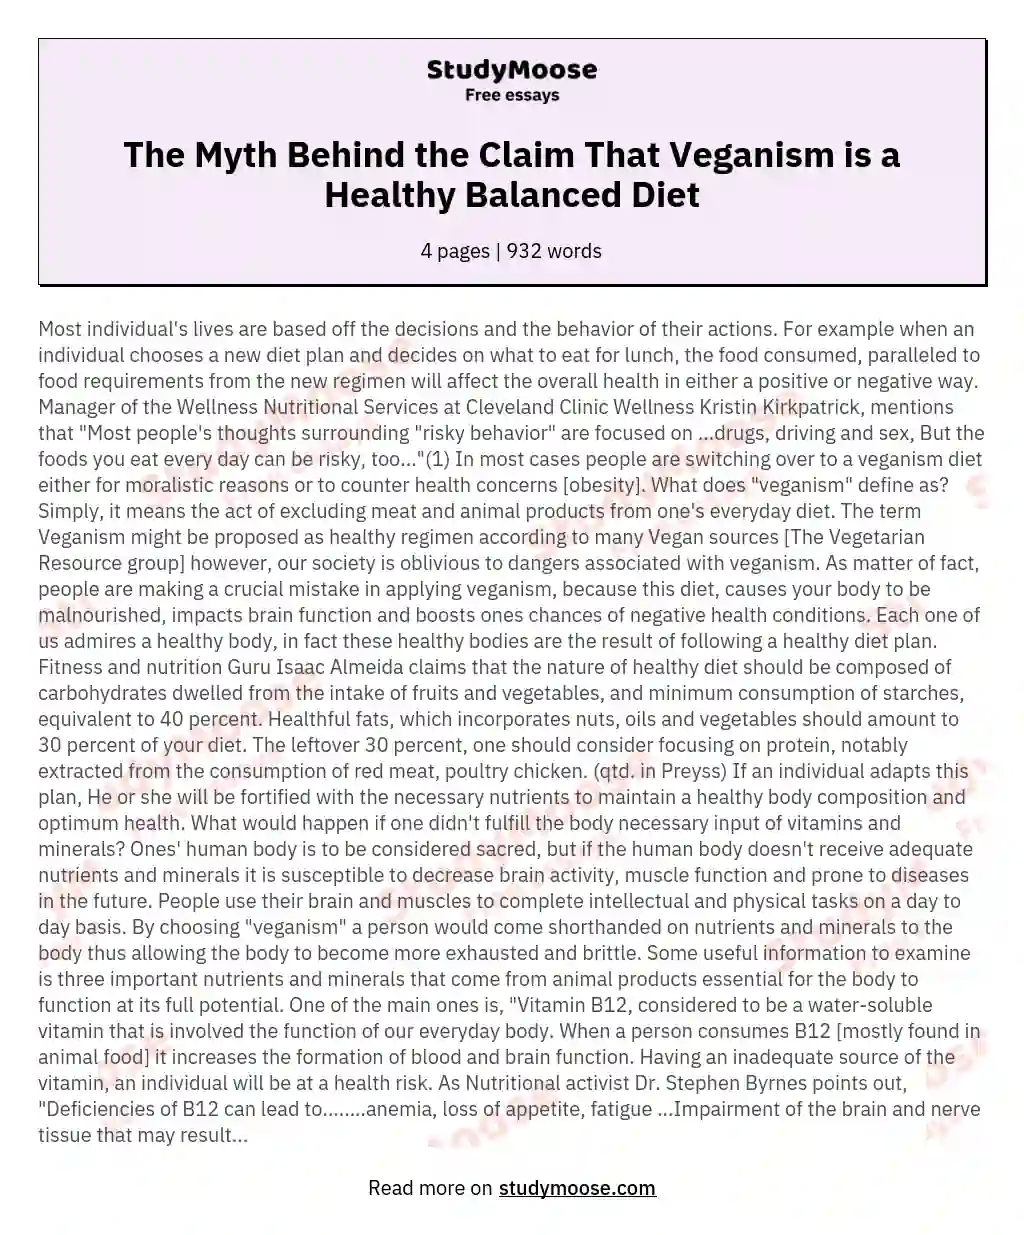 The Myth Behind the Claim That Veganism is a Healthy Balanced Diet essay